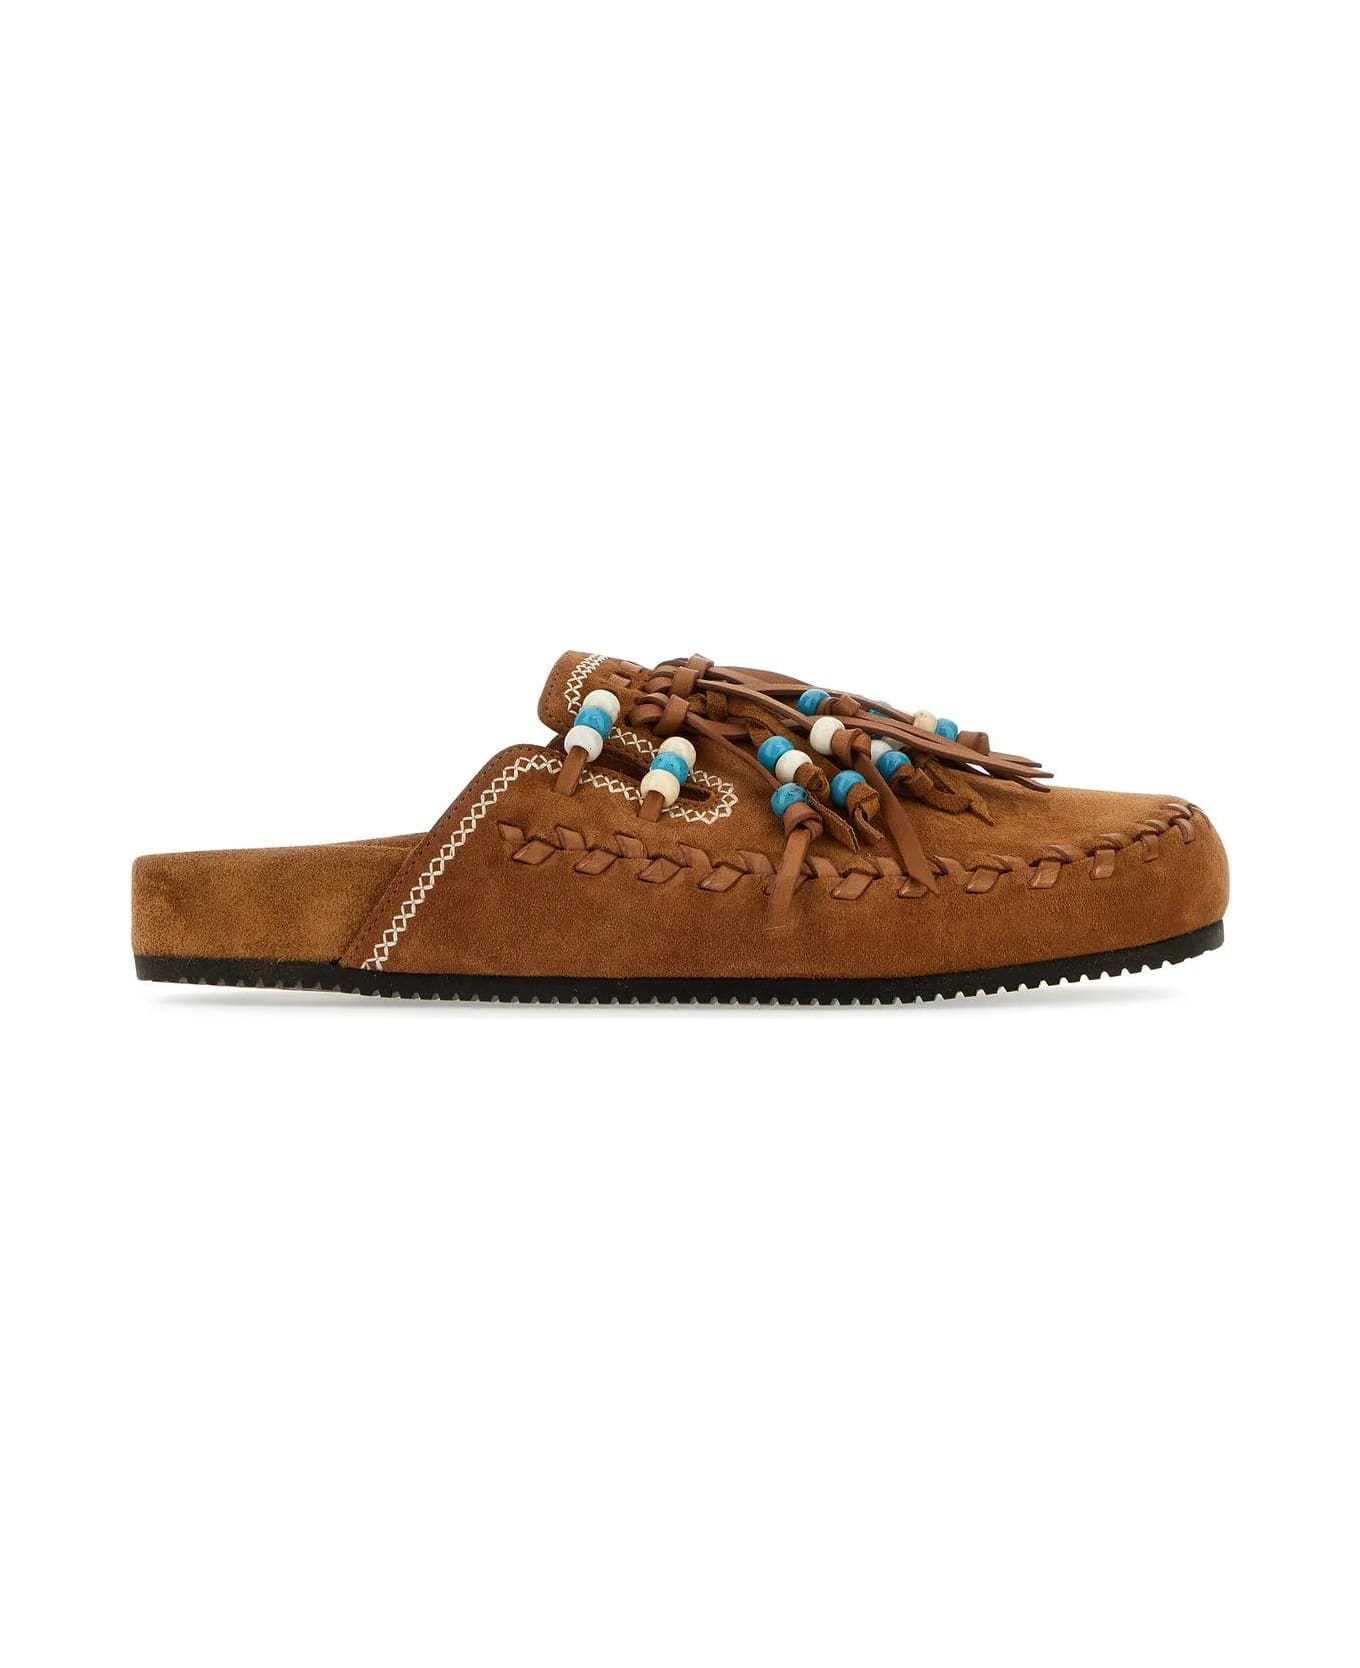 Alanui Camel Suede Leather Salvation Mountain Slippers - Brown